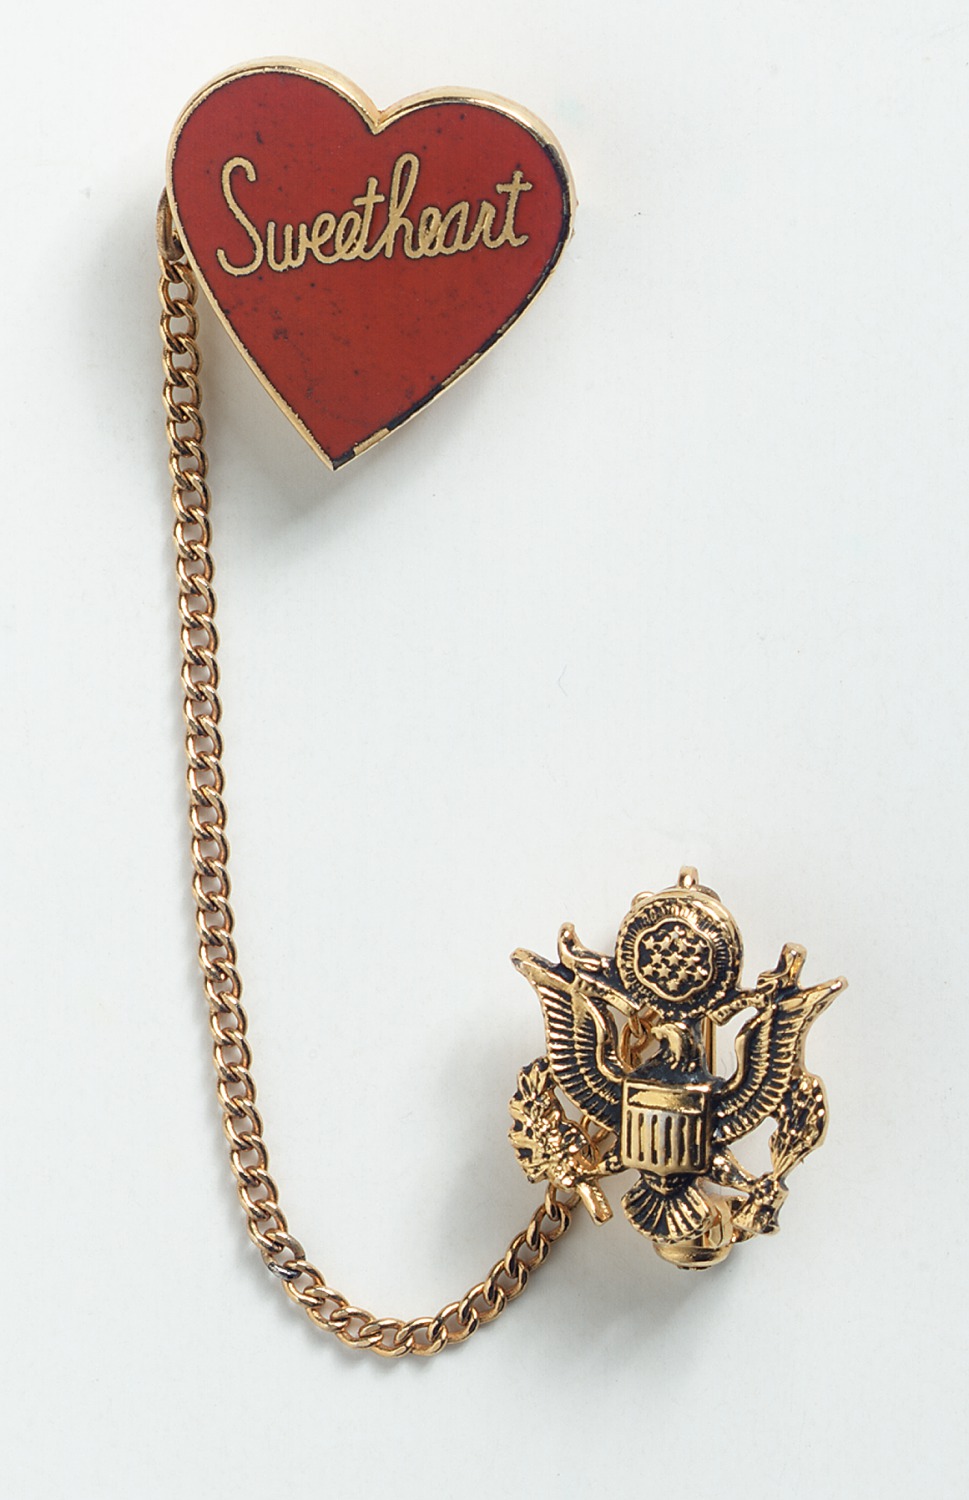 Unknown, U.S Army sweetheart chain pin, 1940s. Metal and enamel. Gift of Mrs. Kelly Ellman